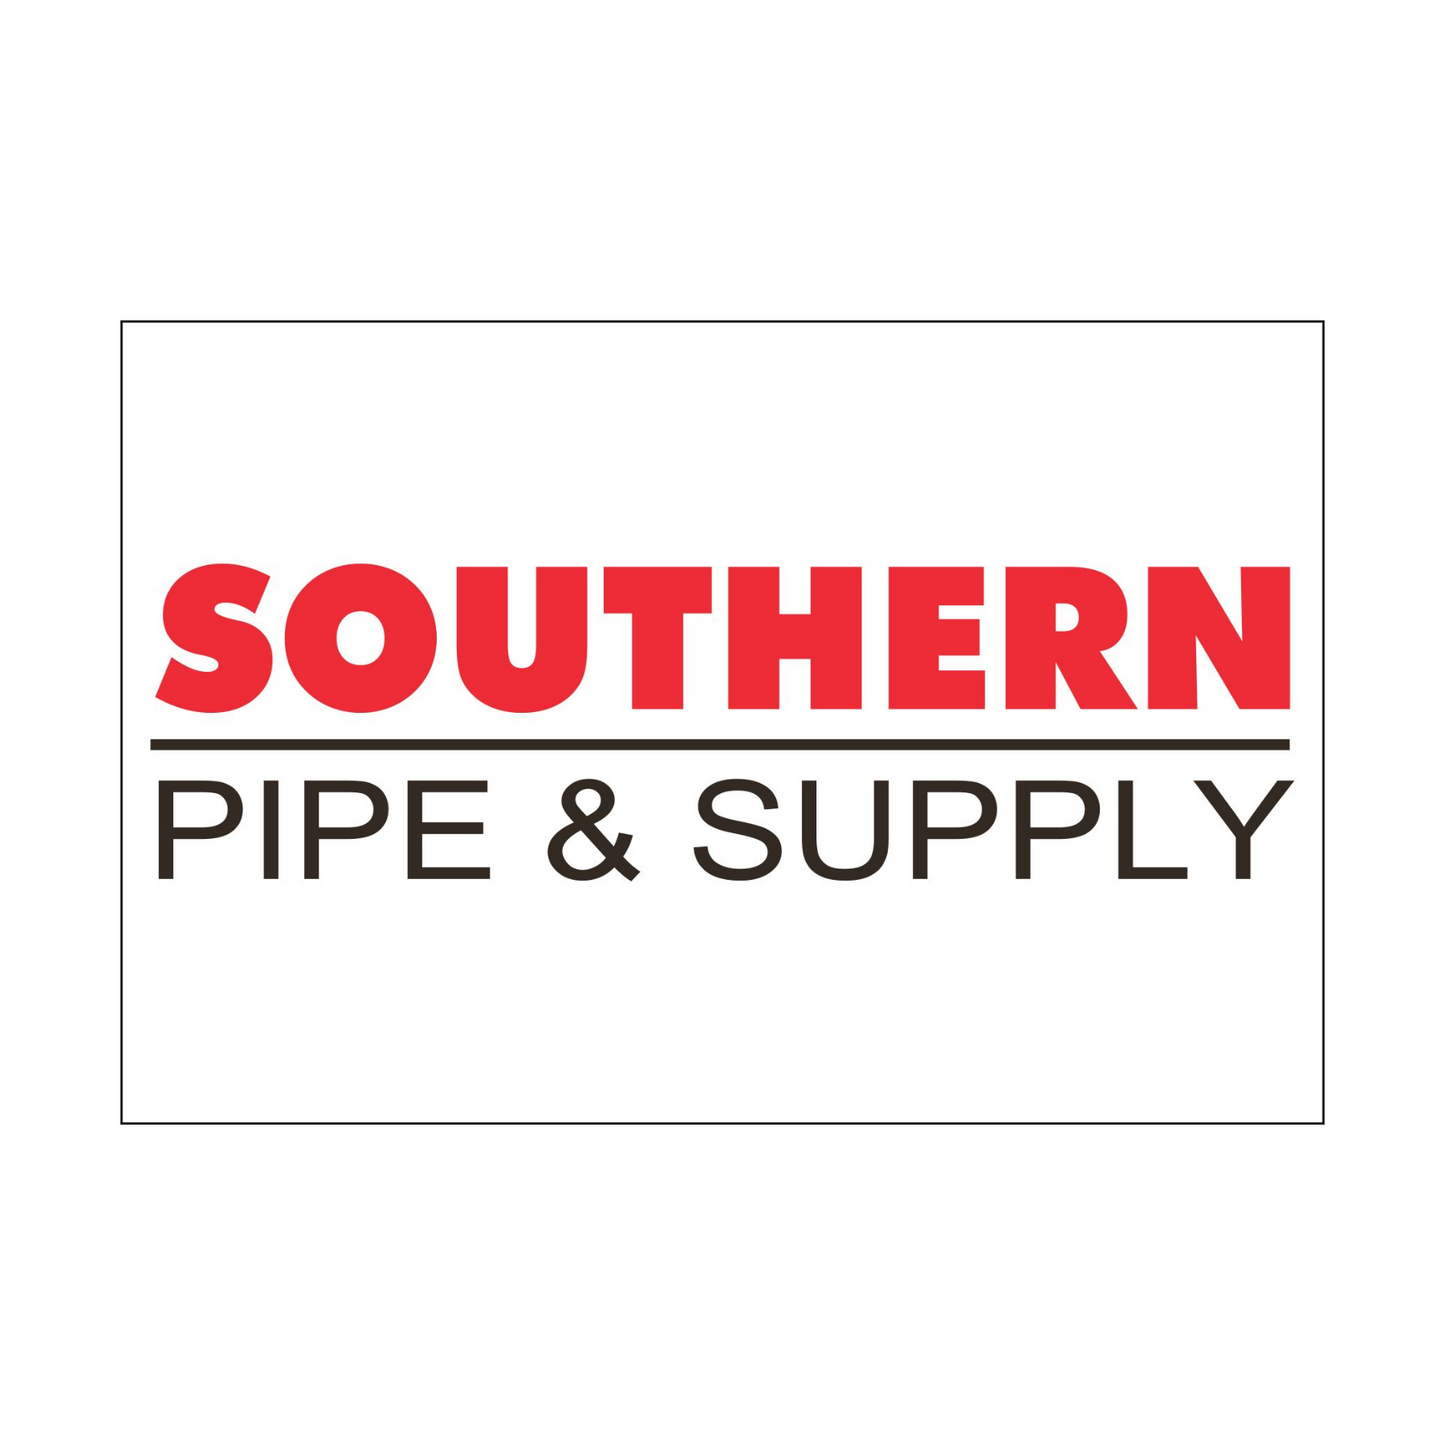 Southern Pipe 4x6 Vinyl Banner